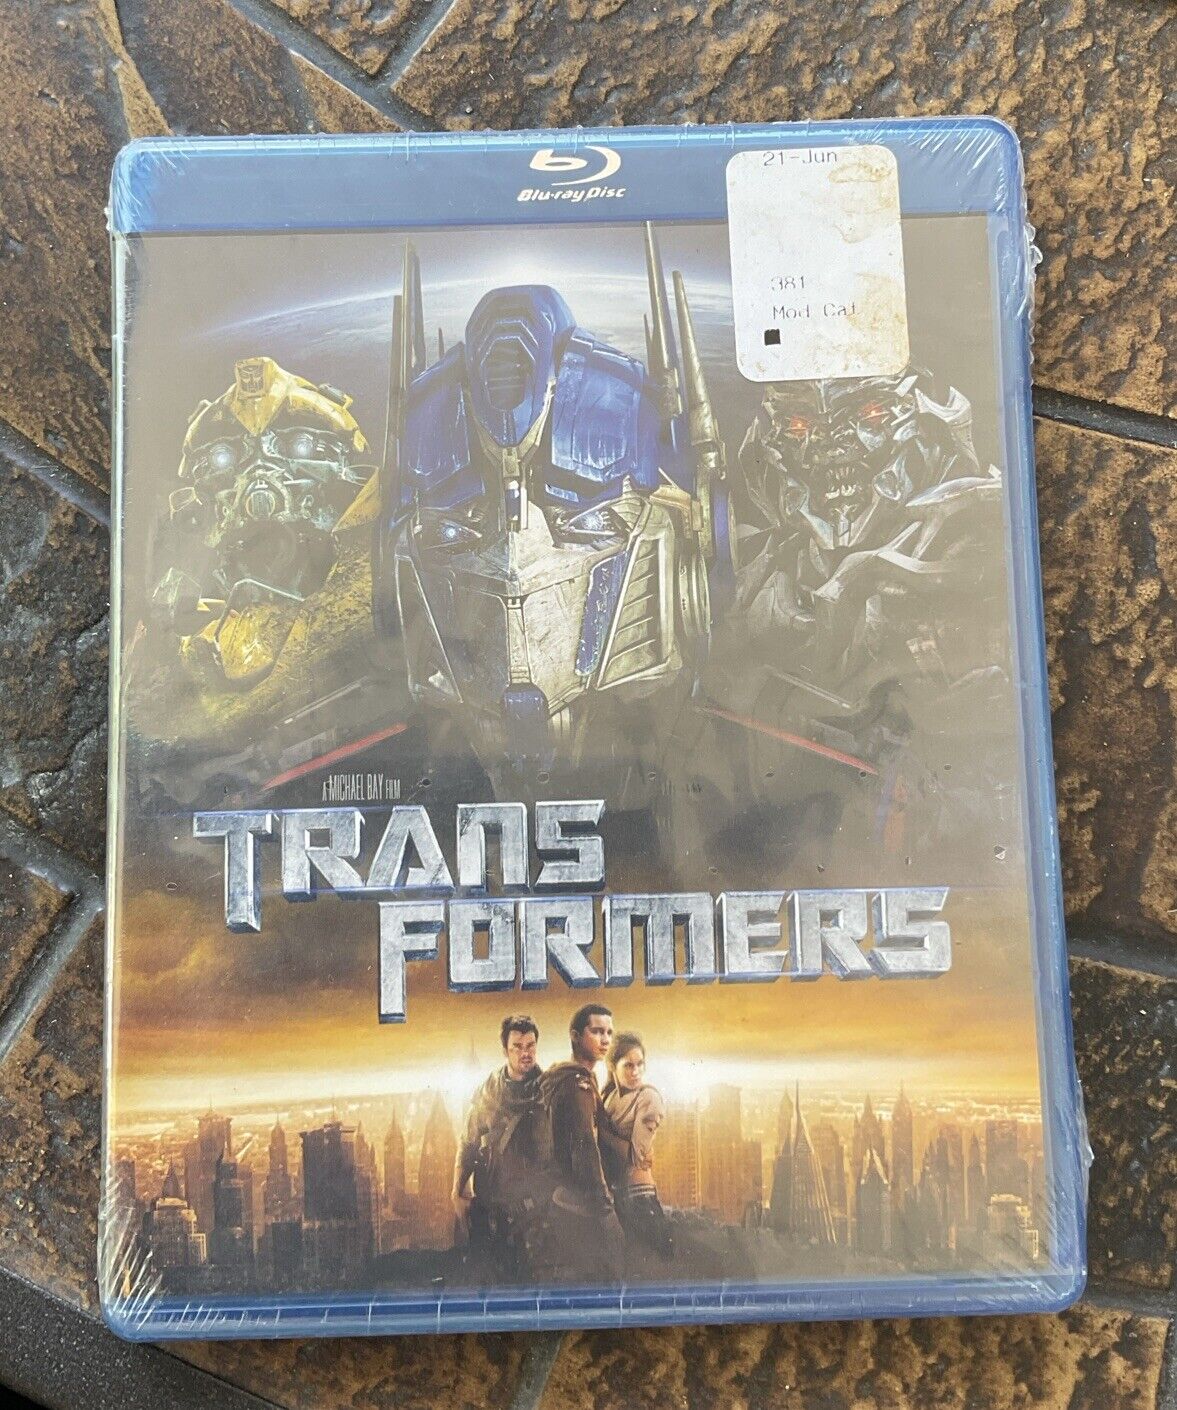 New & Sealed!! Transformers (Blu-ray, 2007) With Special Features